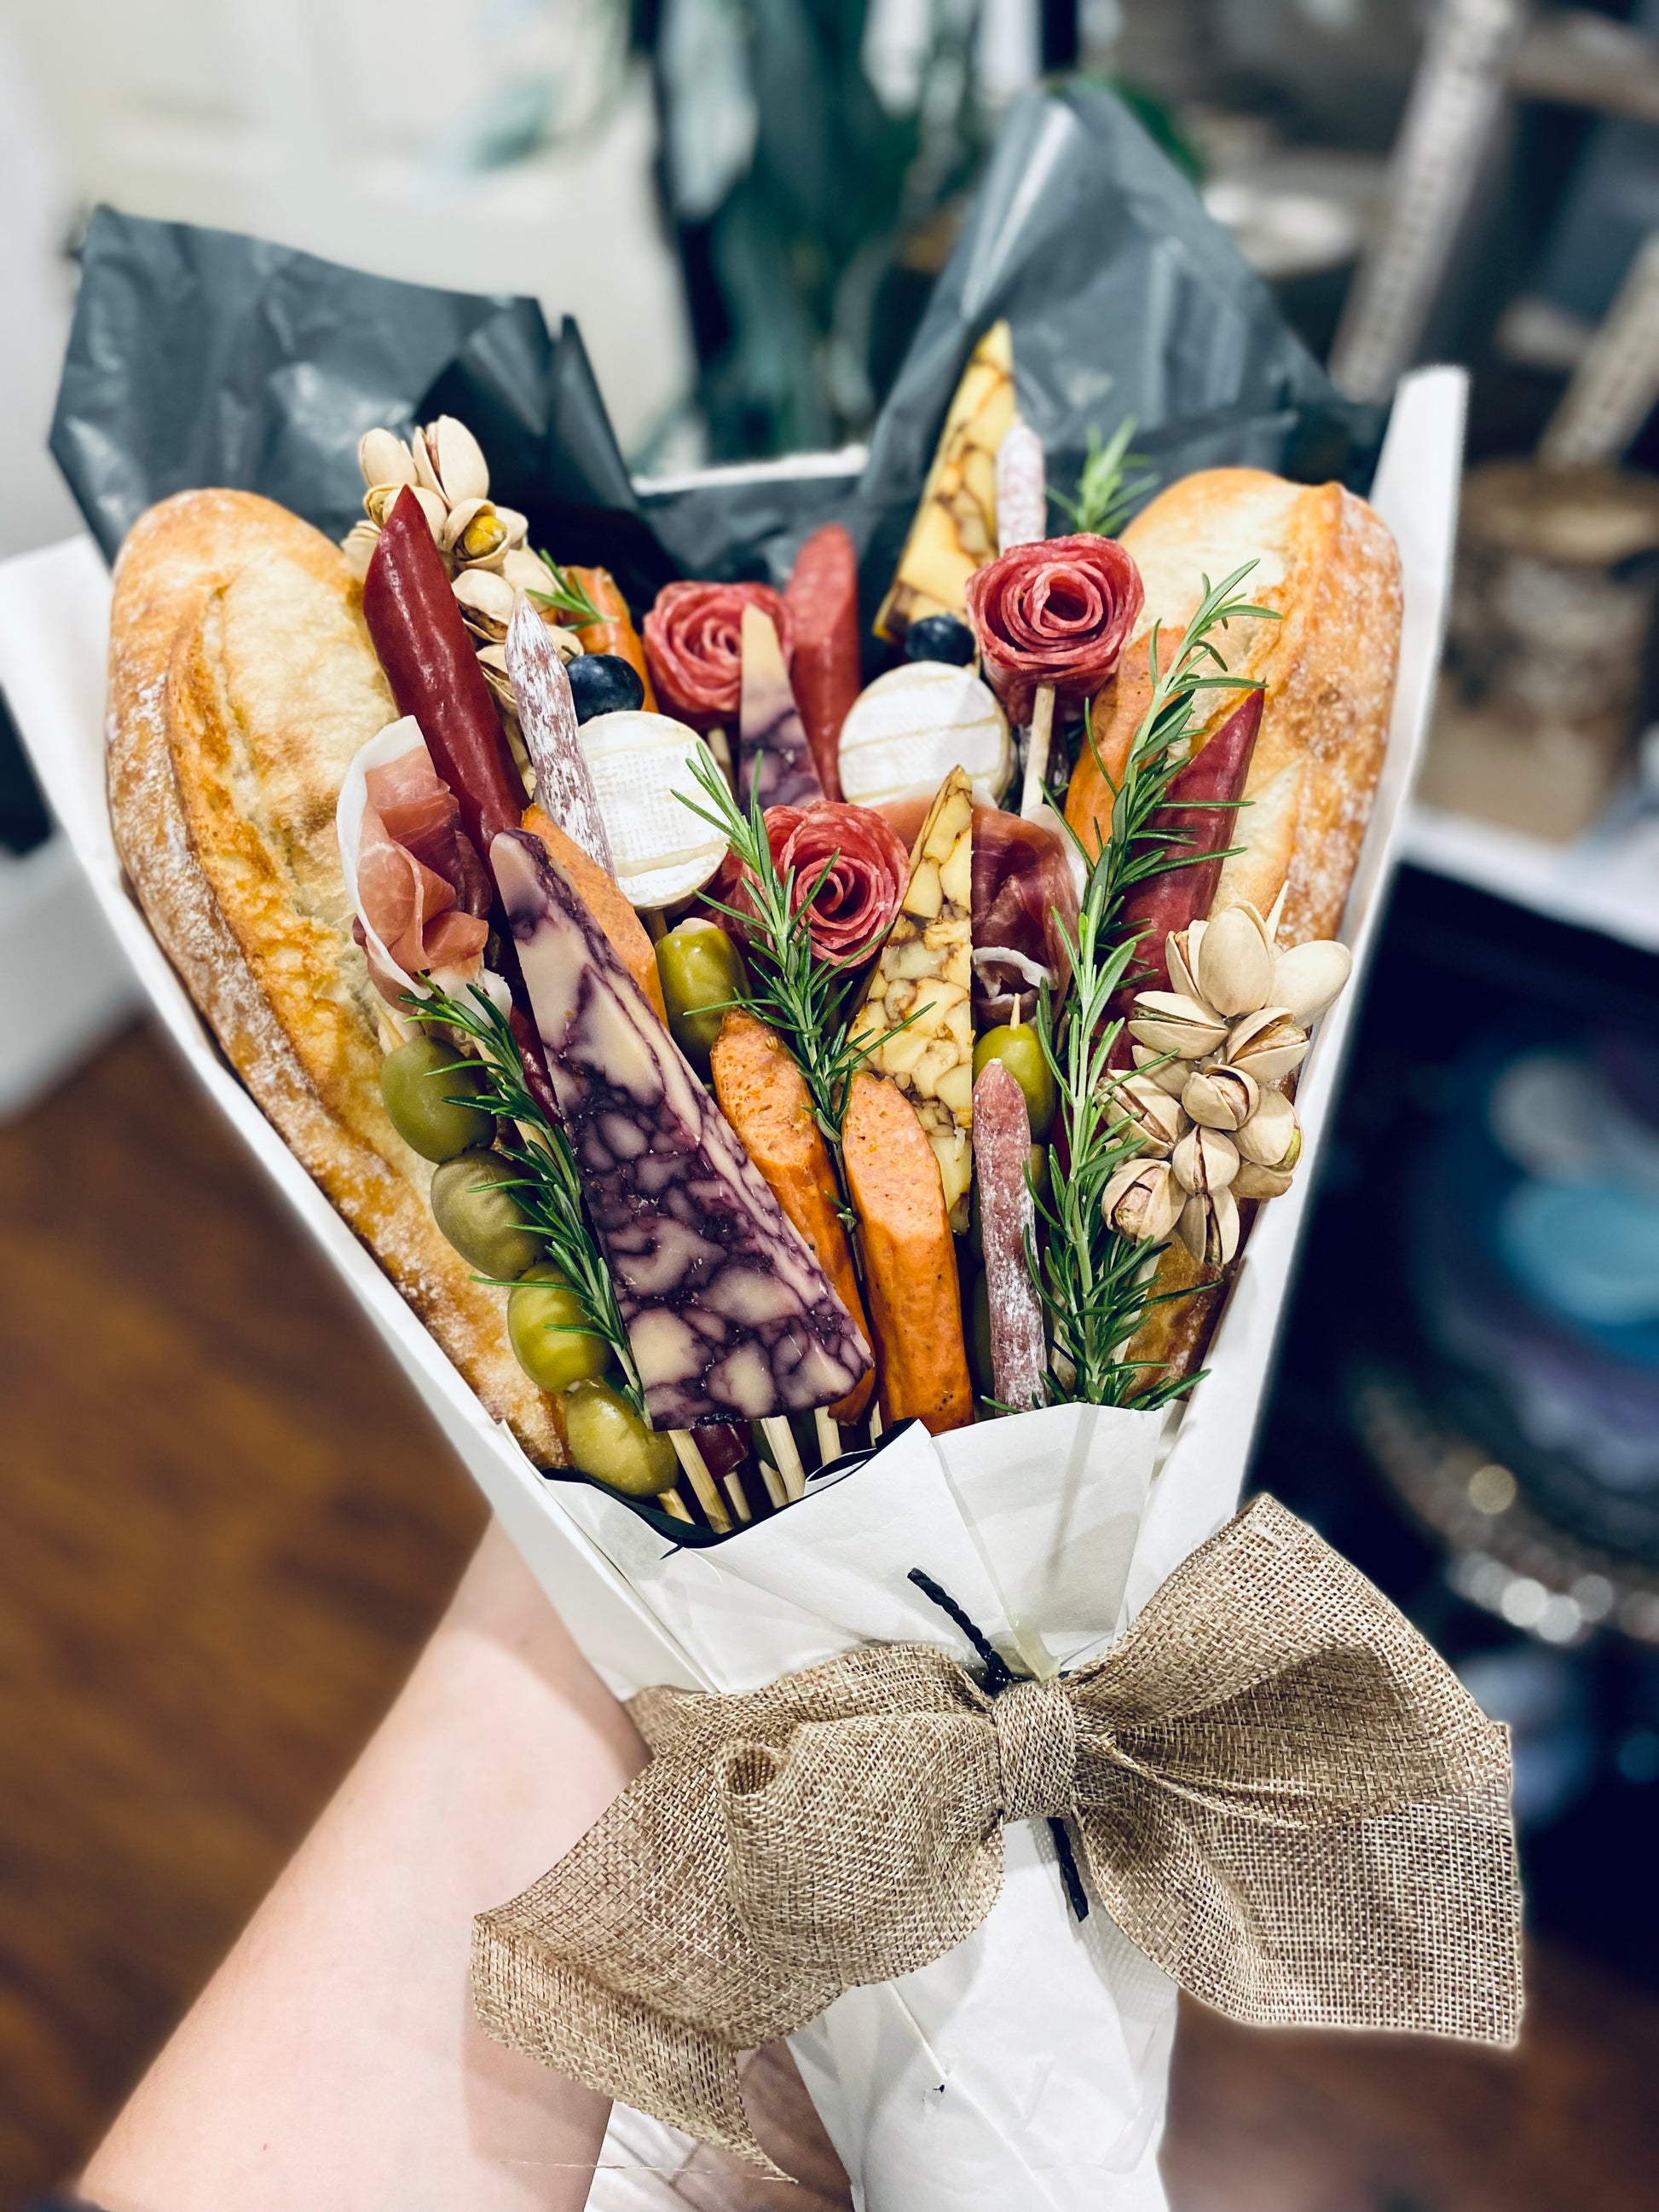 Artisanal Charcuterie and cheese bouquet